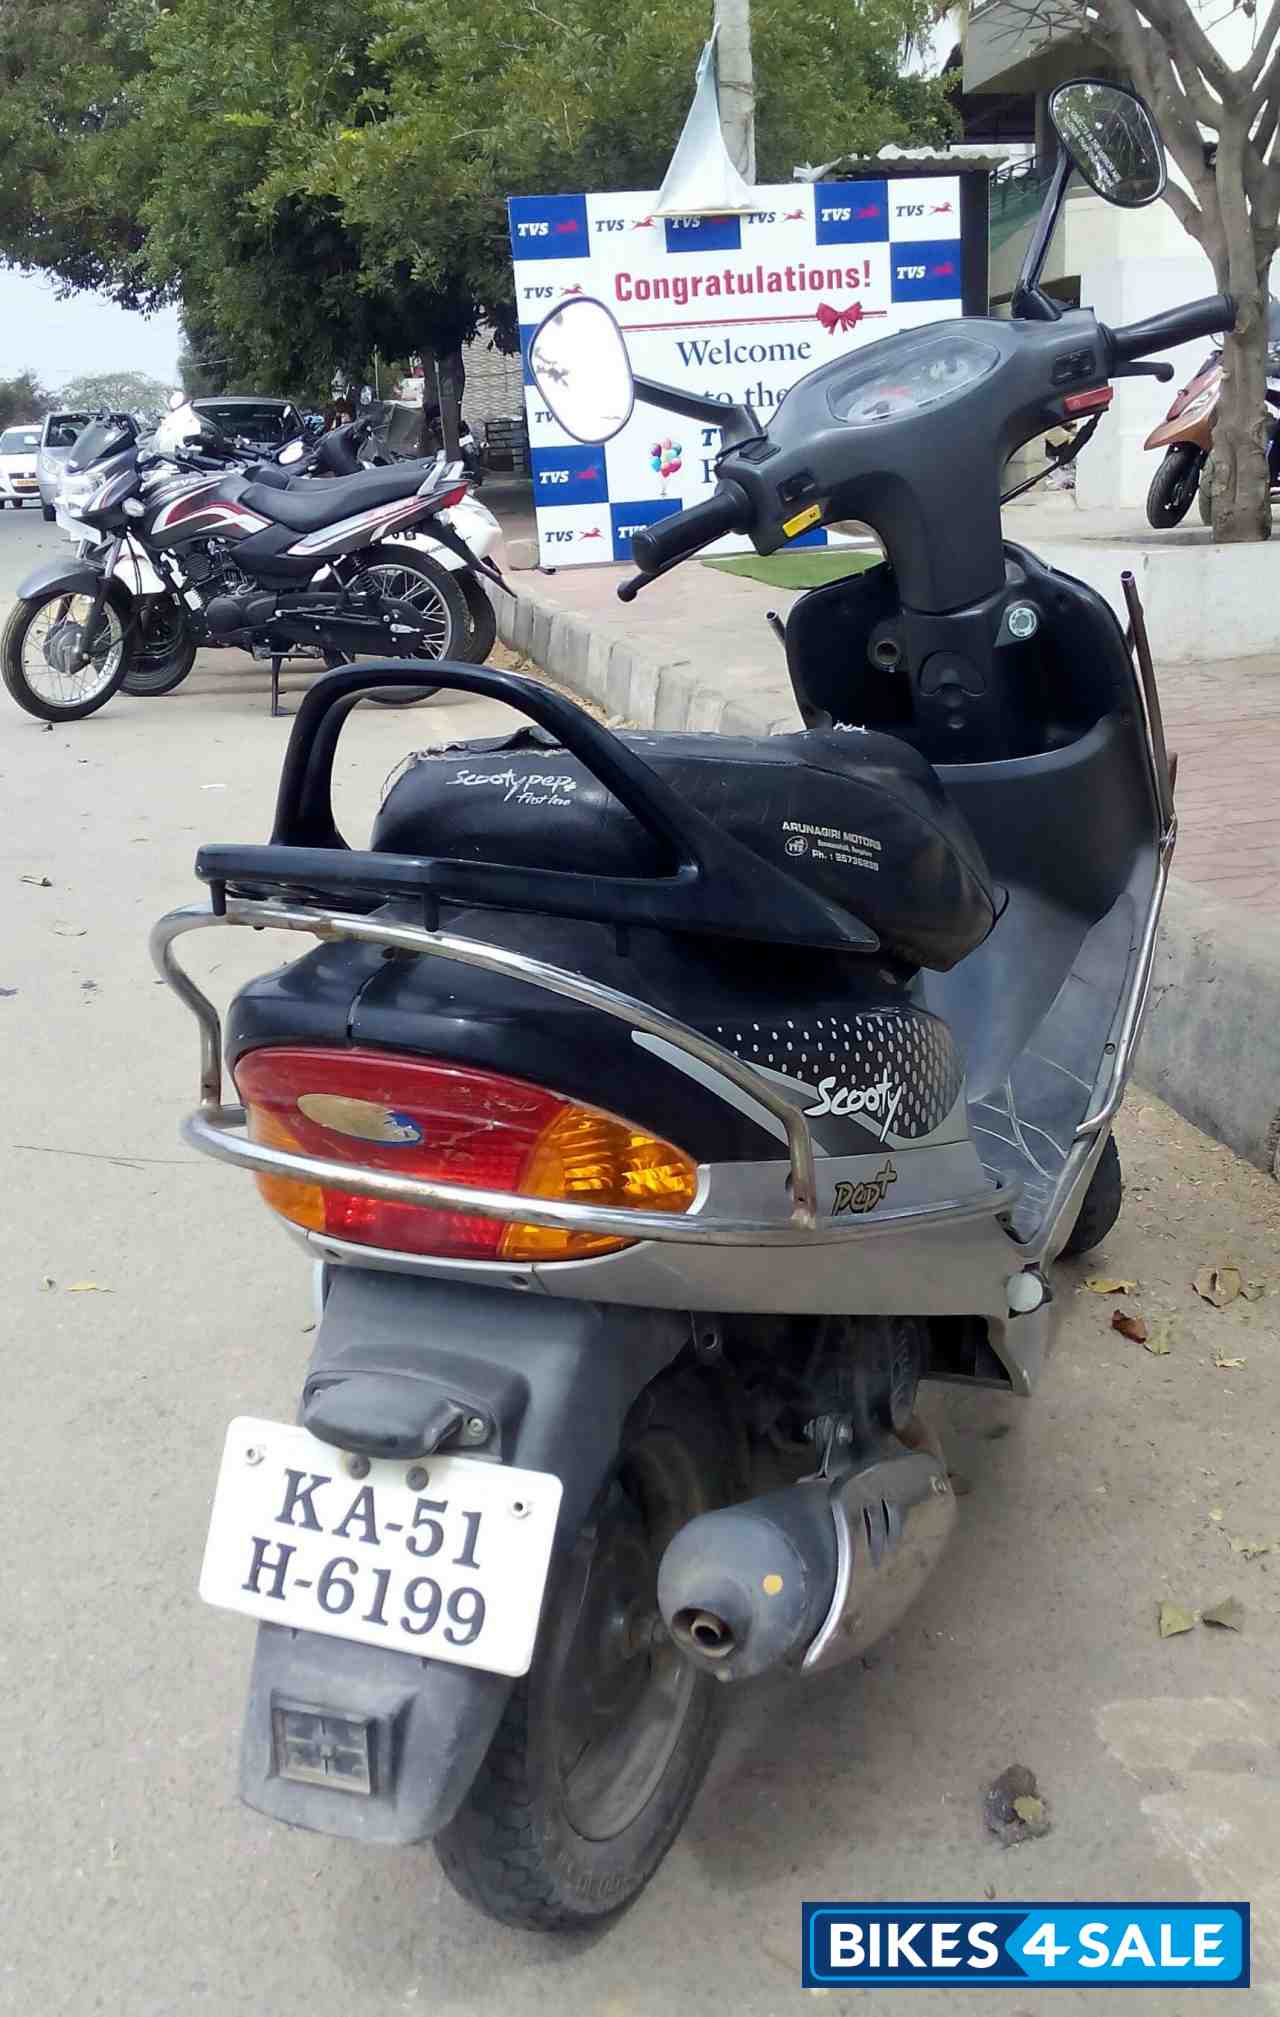 scooty pep second hand price